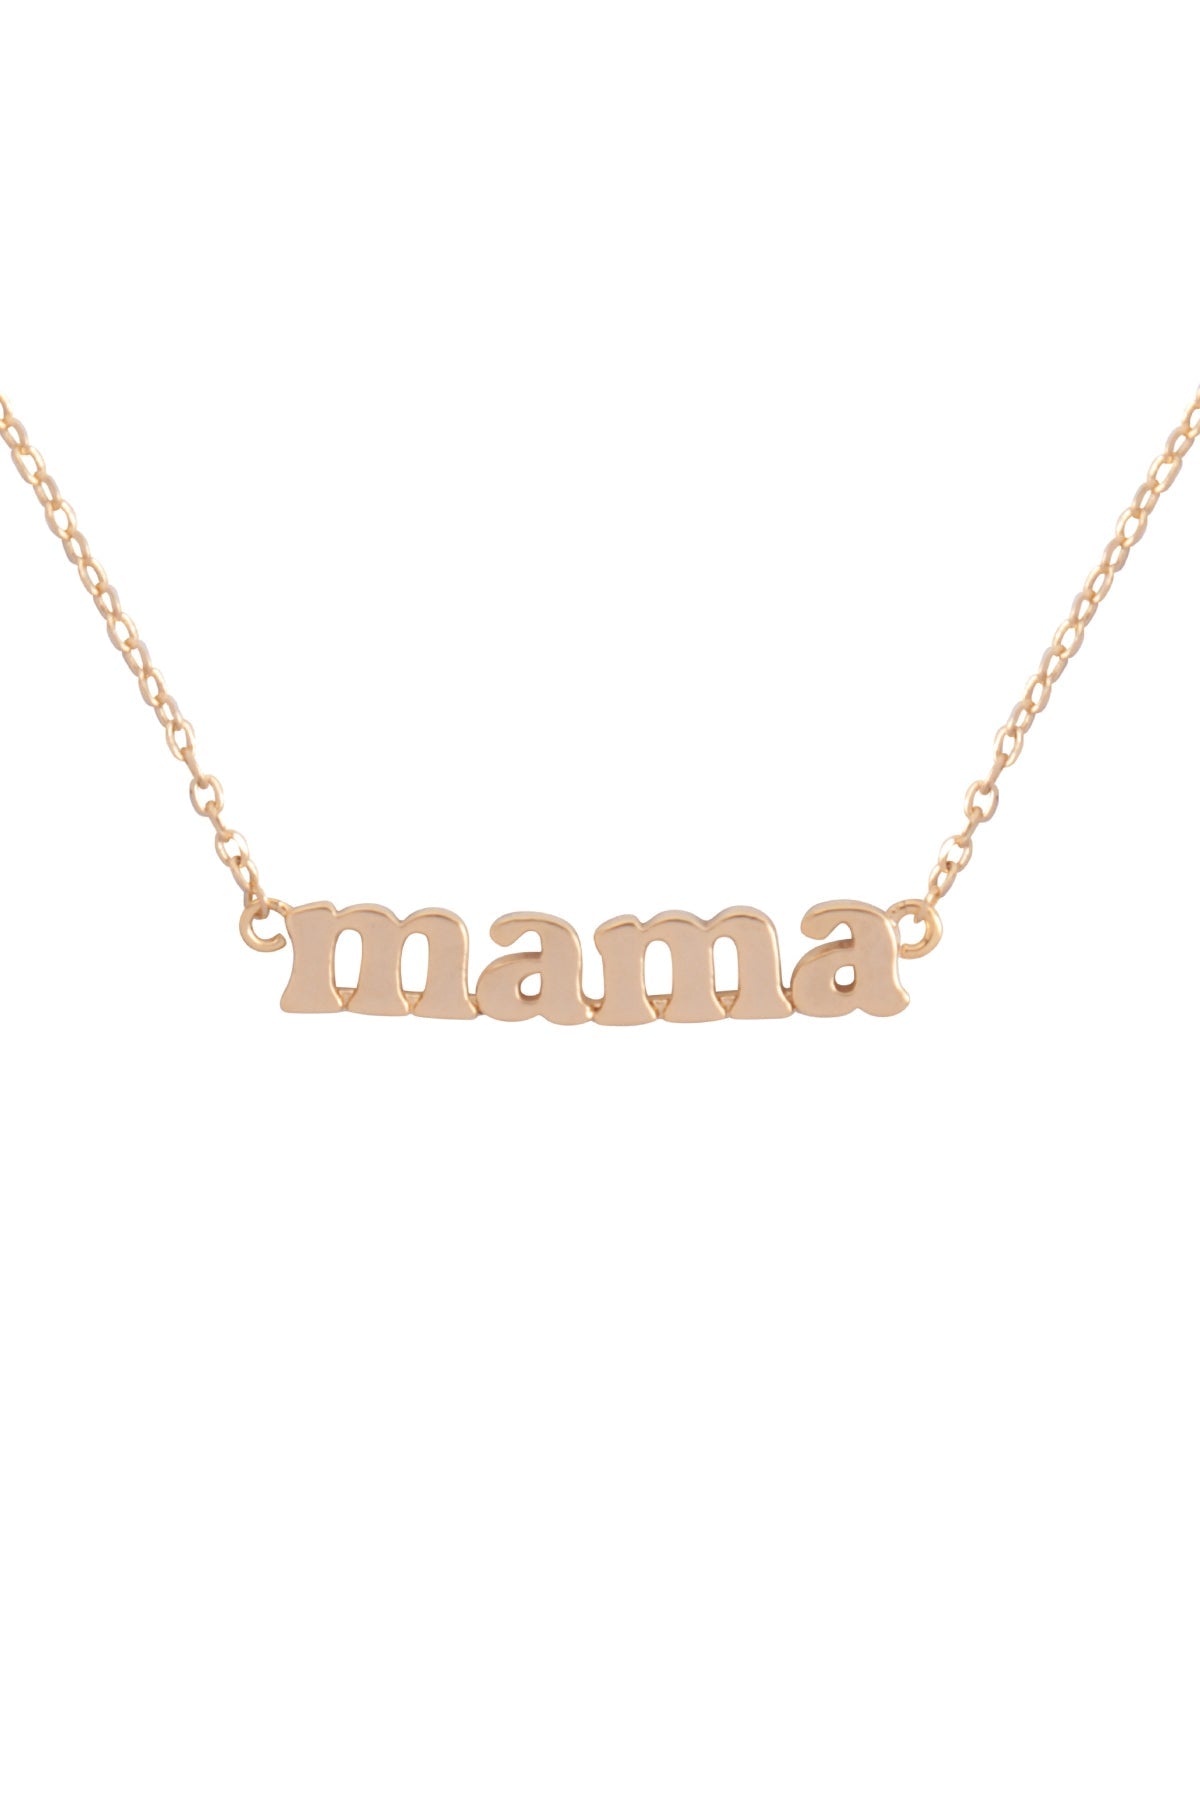 "MAMA" LETTER PENDANT BRASS NECKLACE (NOW $3.00 ONLY!)